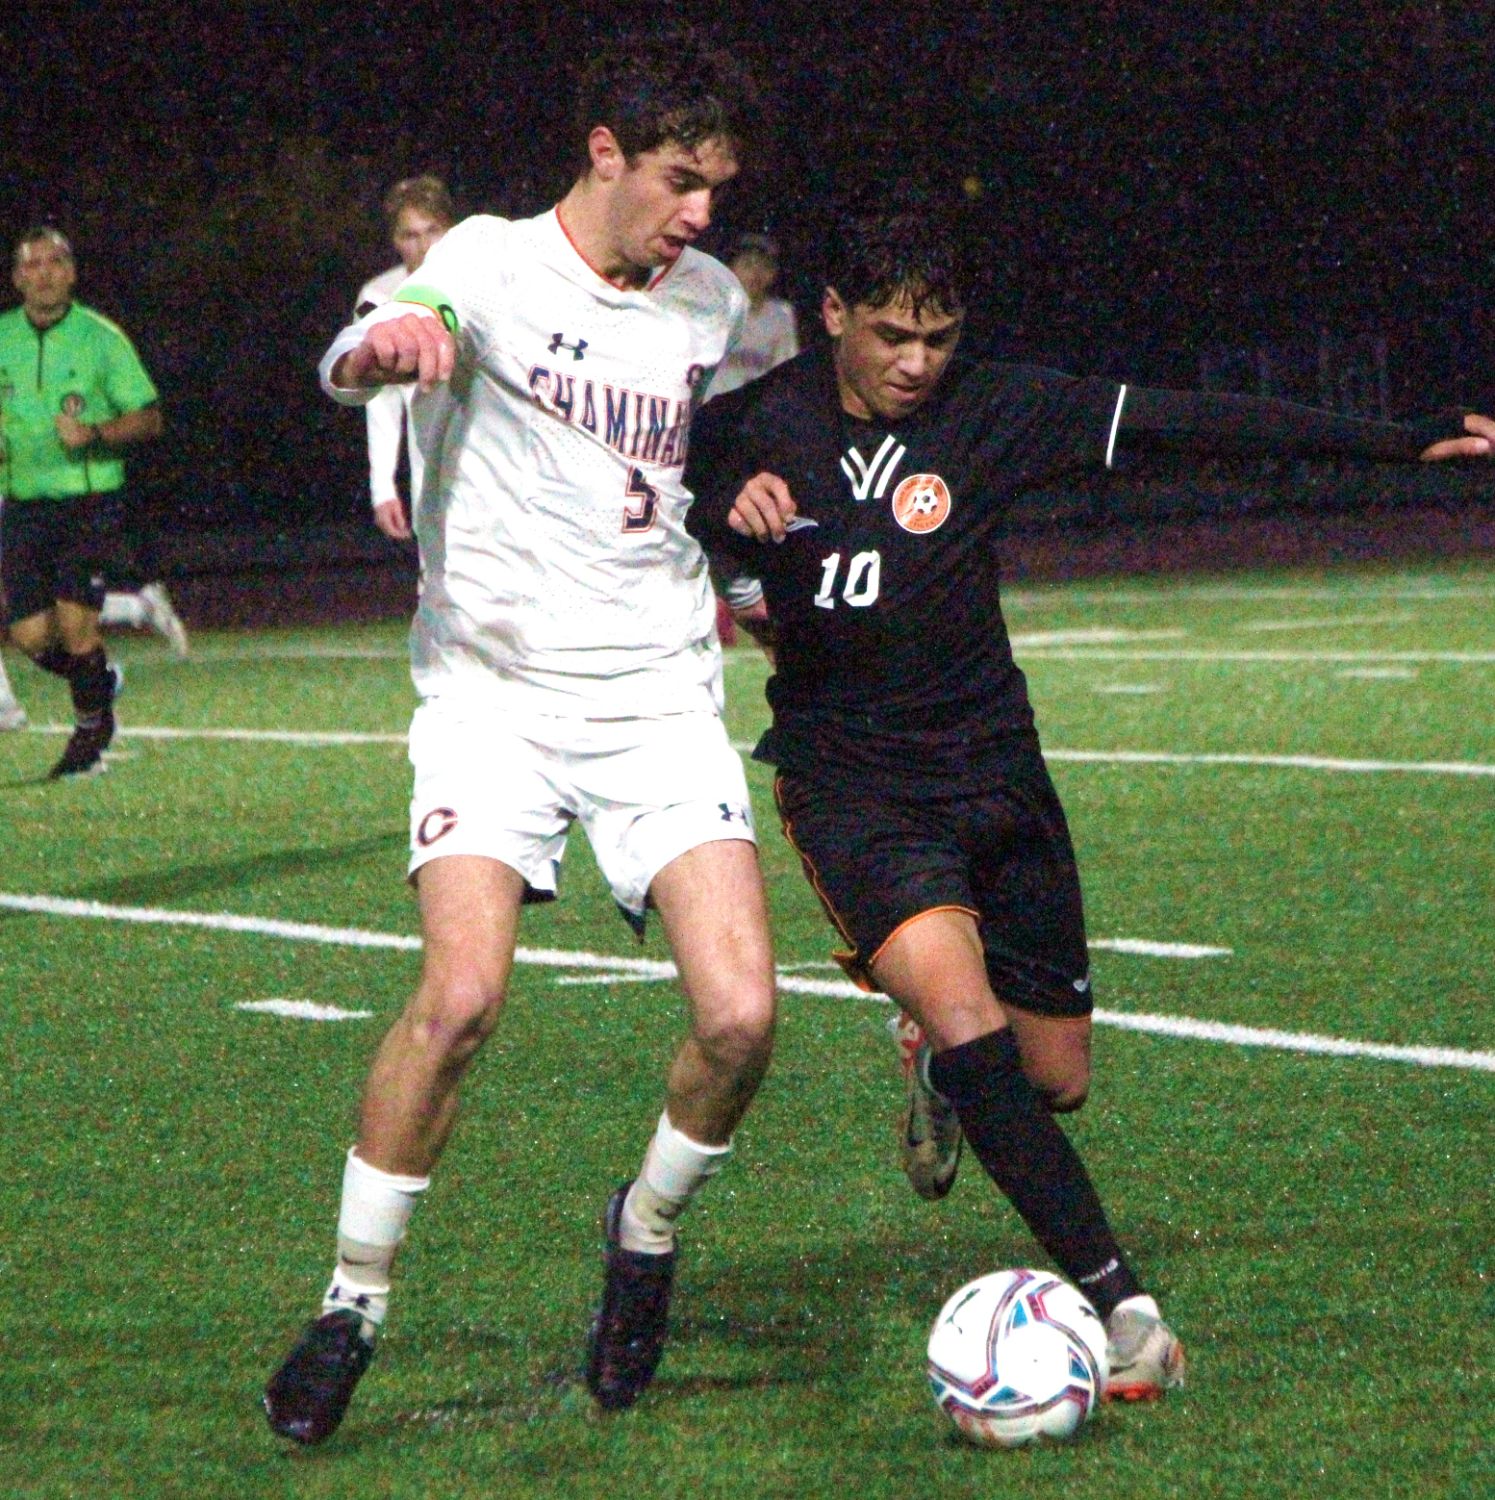 PHOTO: Henk Friezer | The South Pasadenan | South Pasadena High fell to Chaminade 2-1 in a CIF Division 3 wildcard double overtime loss at home on Tuesday.